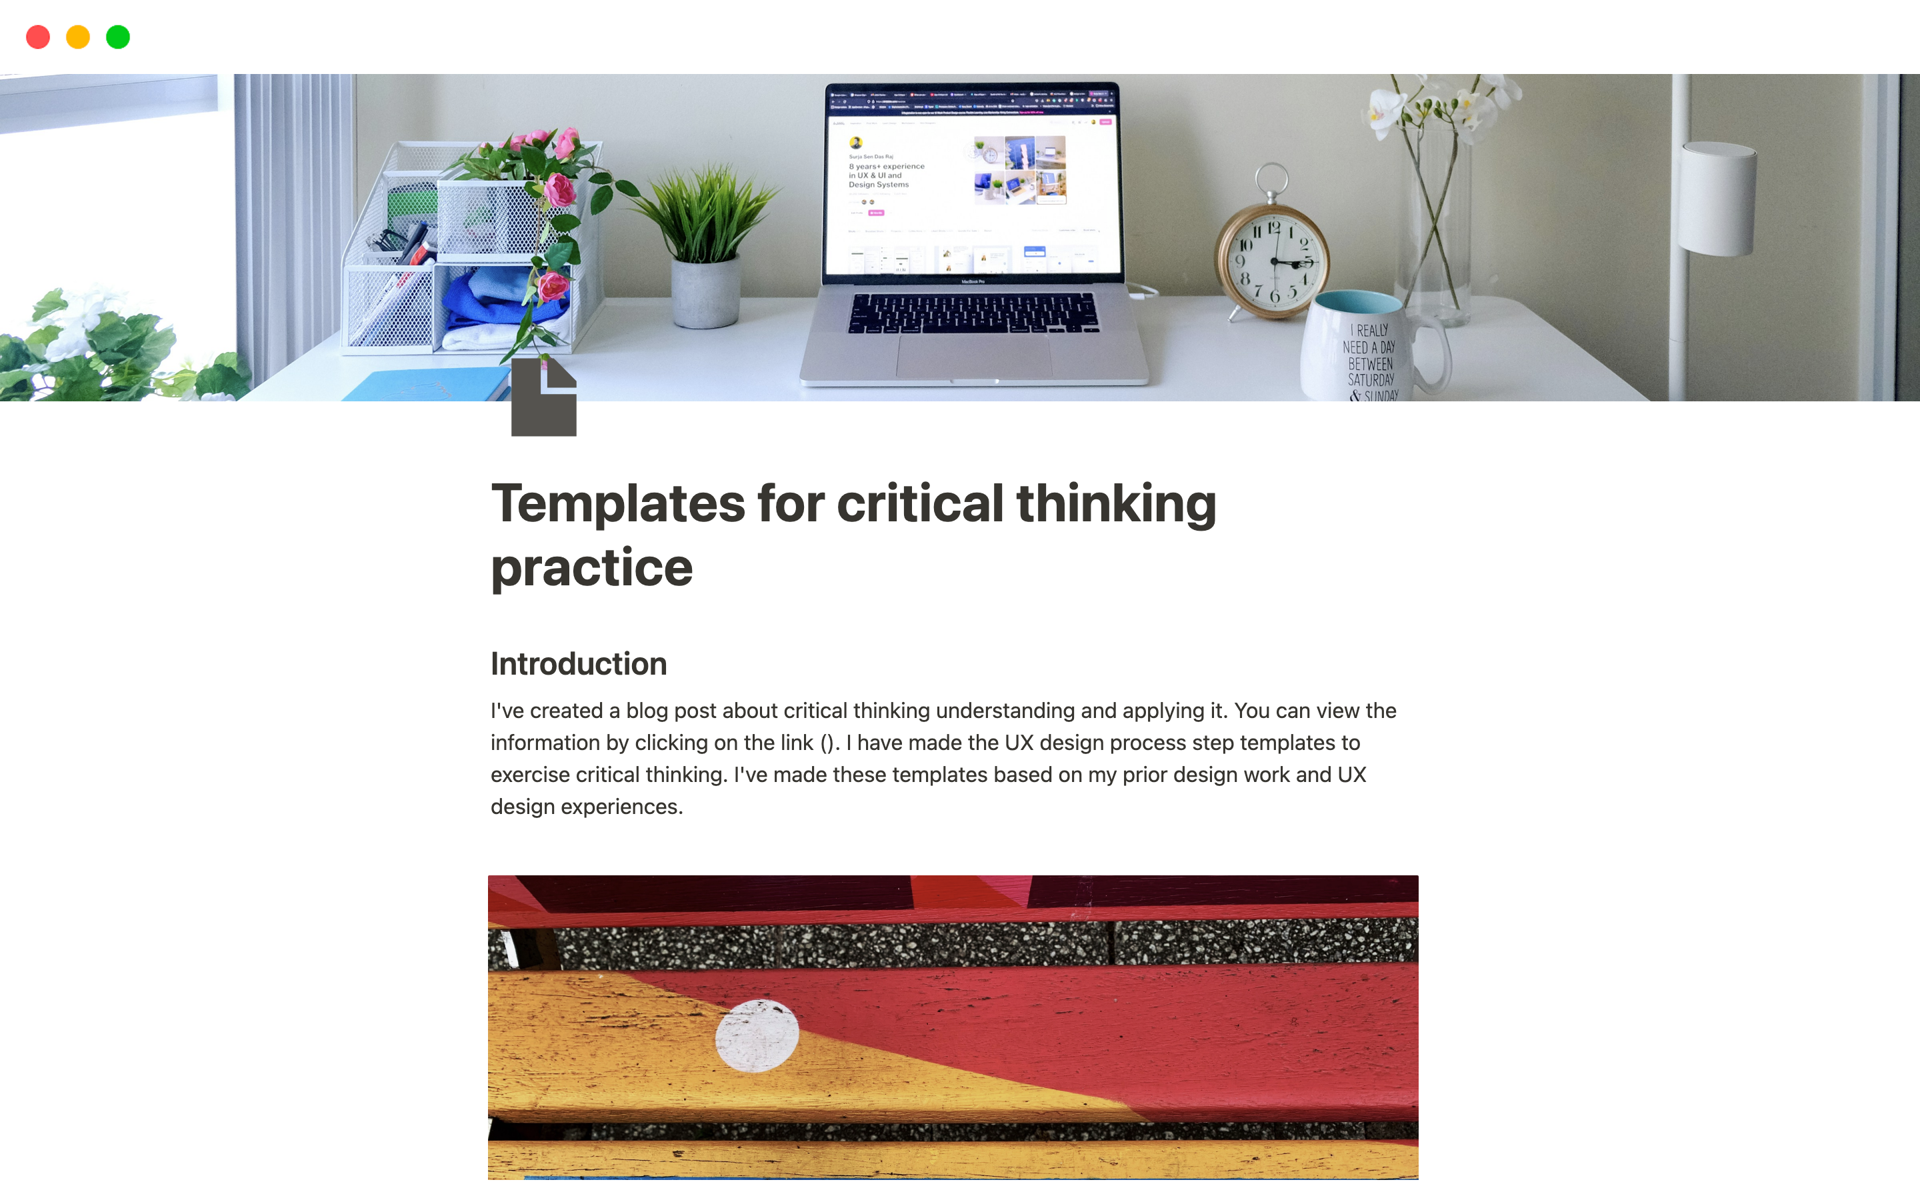 The templates help the UX designers to apply critical thinking in the design process.